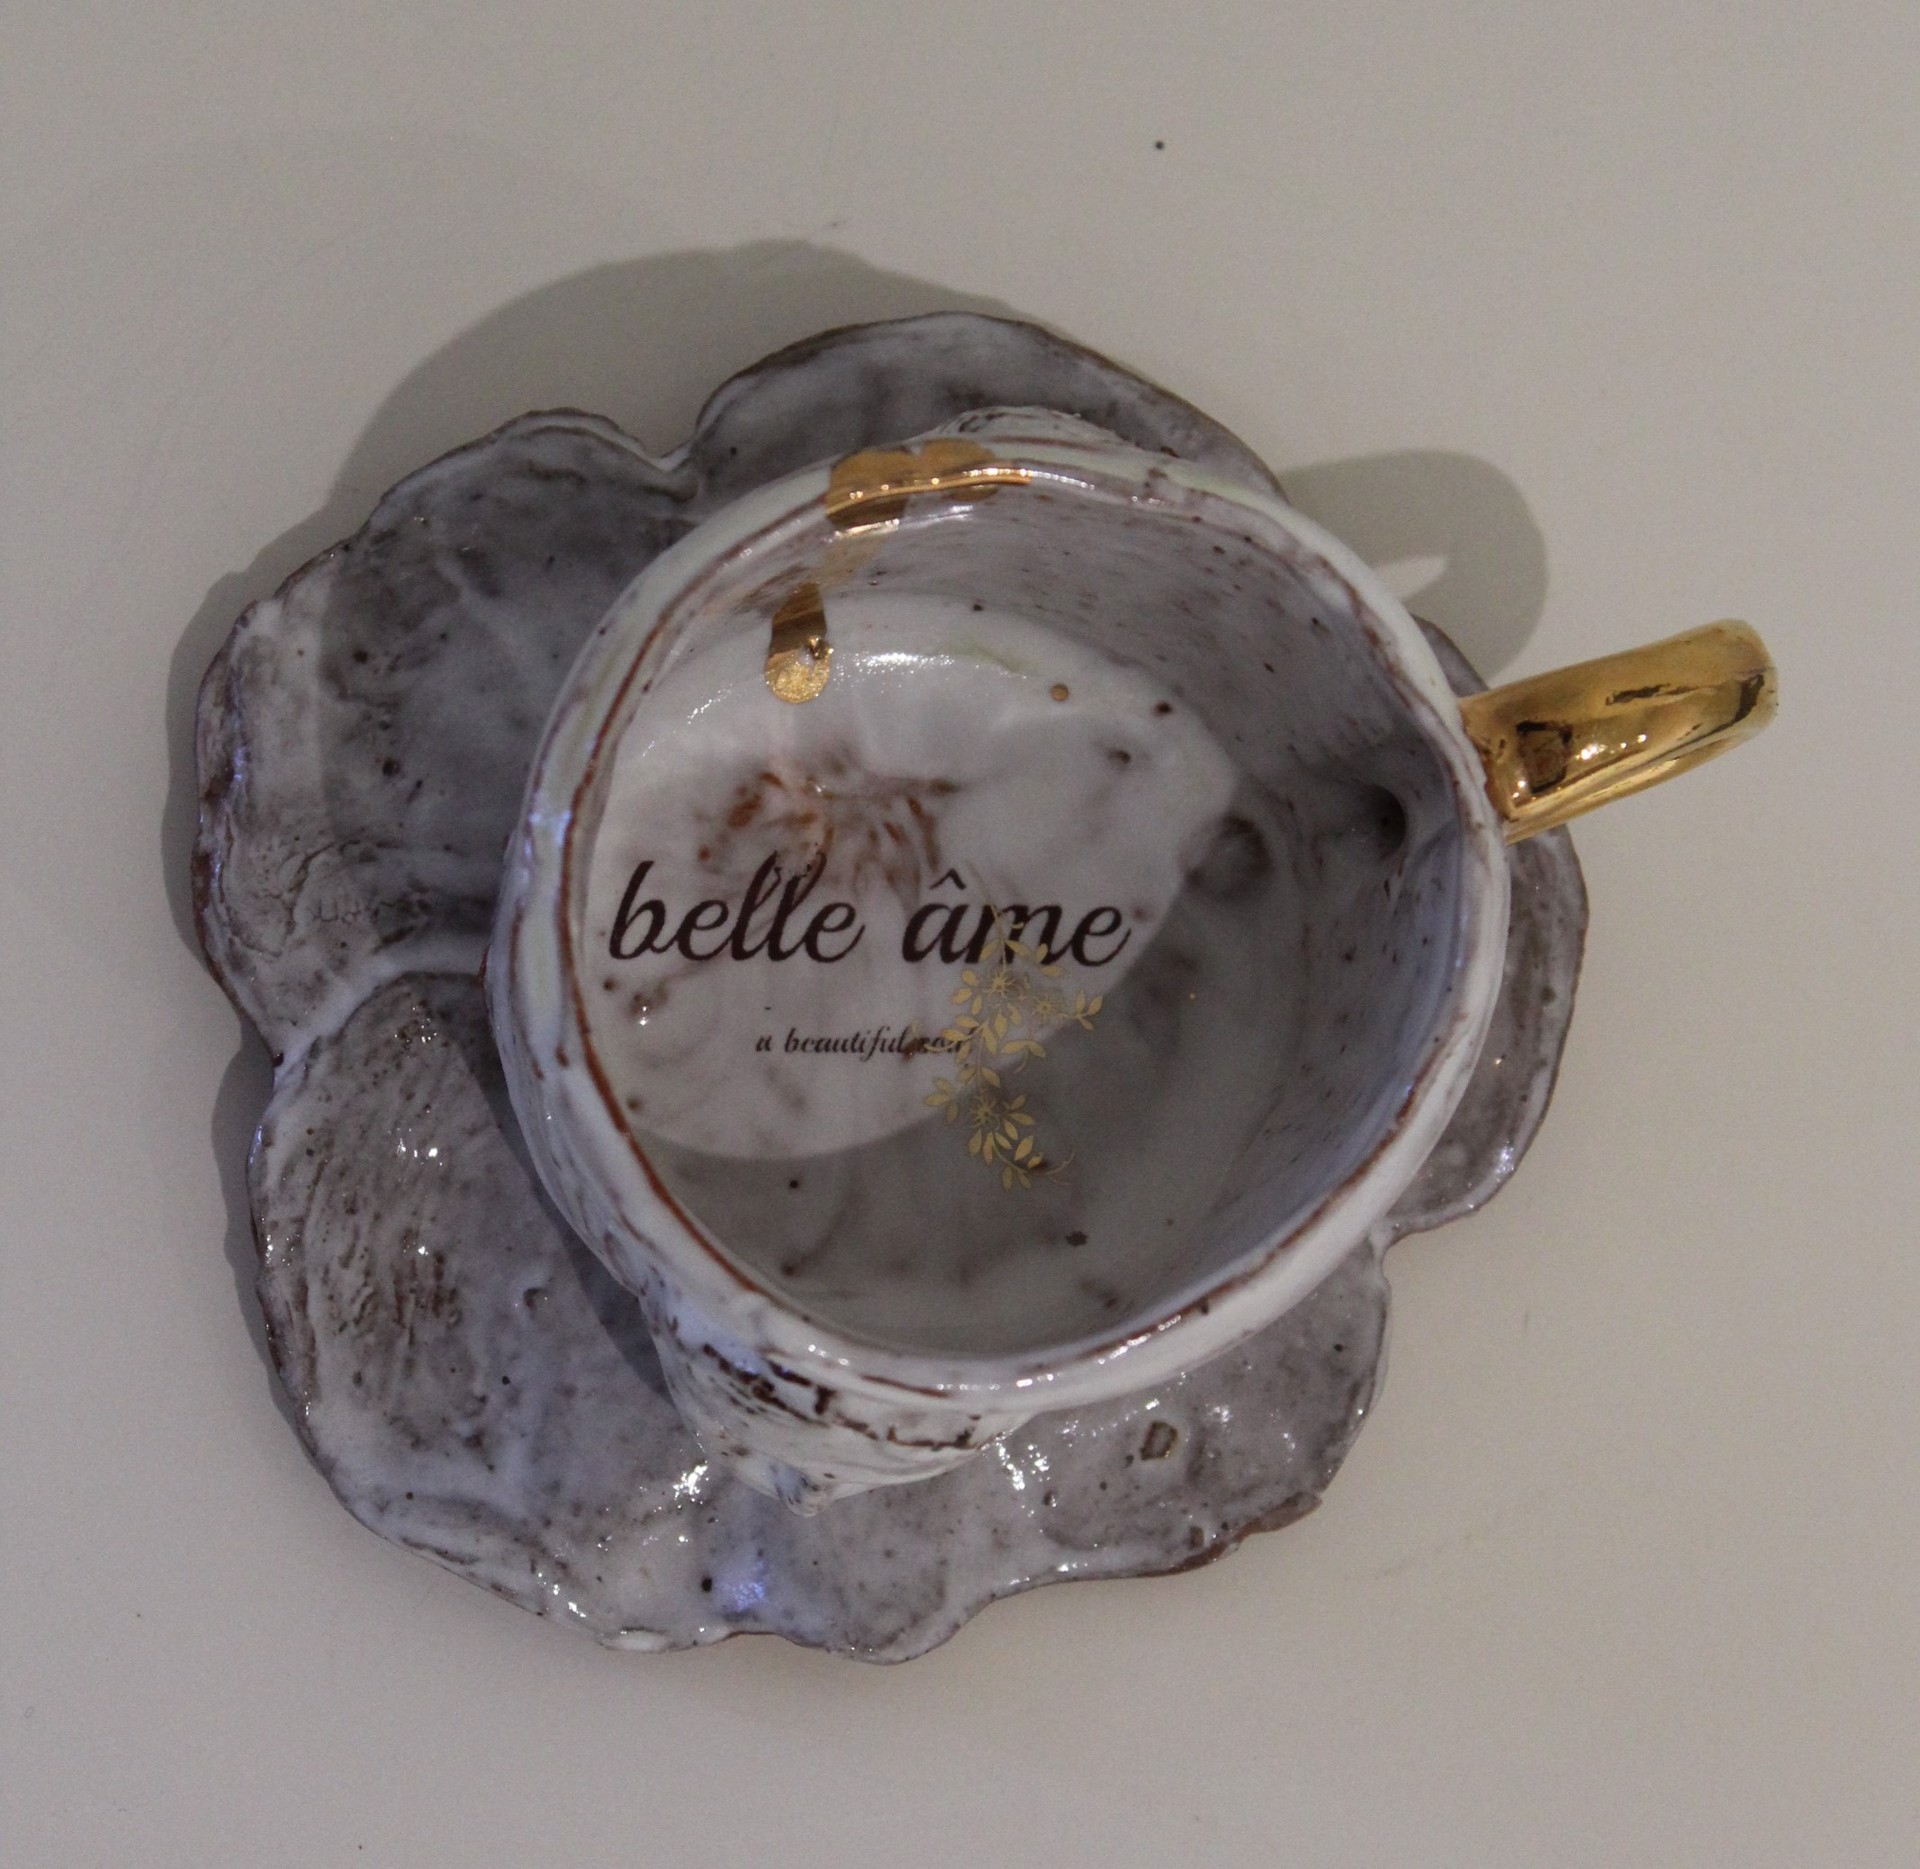 Espresso Cup and Saucer 1 (belle ame) by Therese Knowles